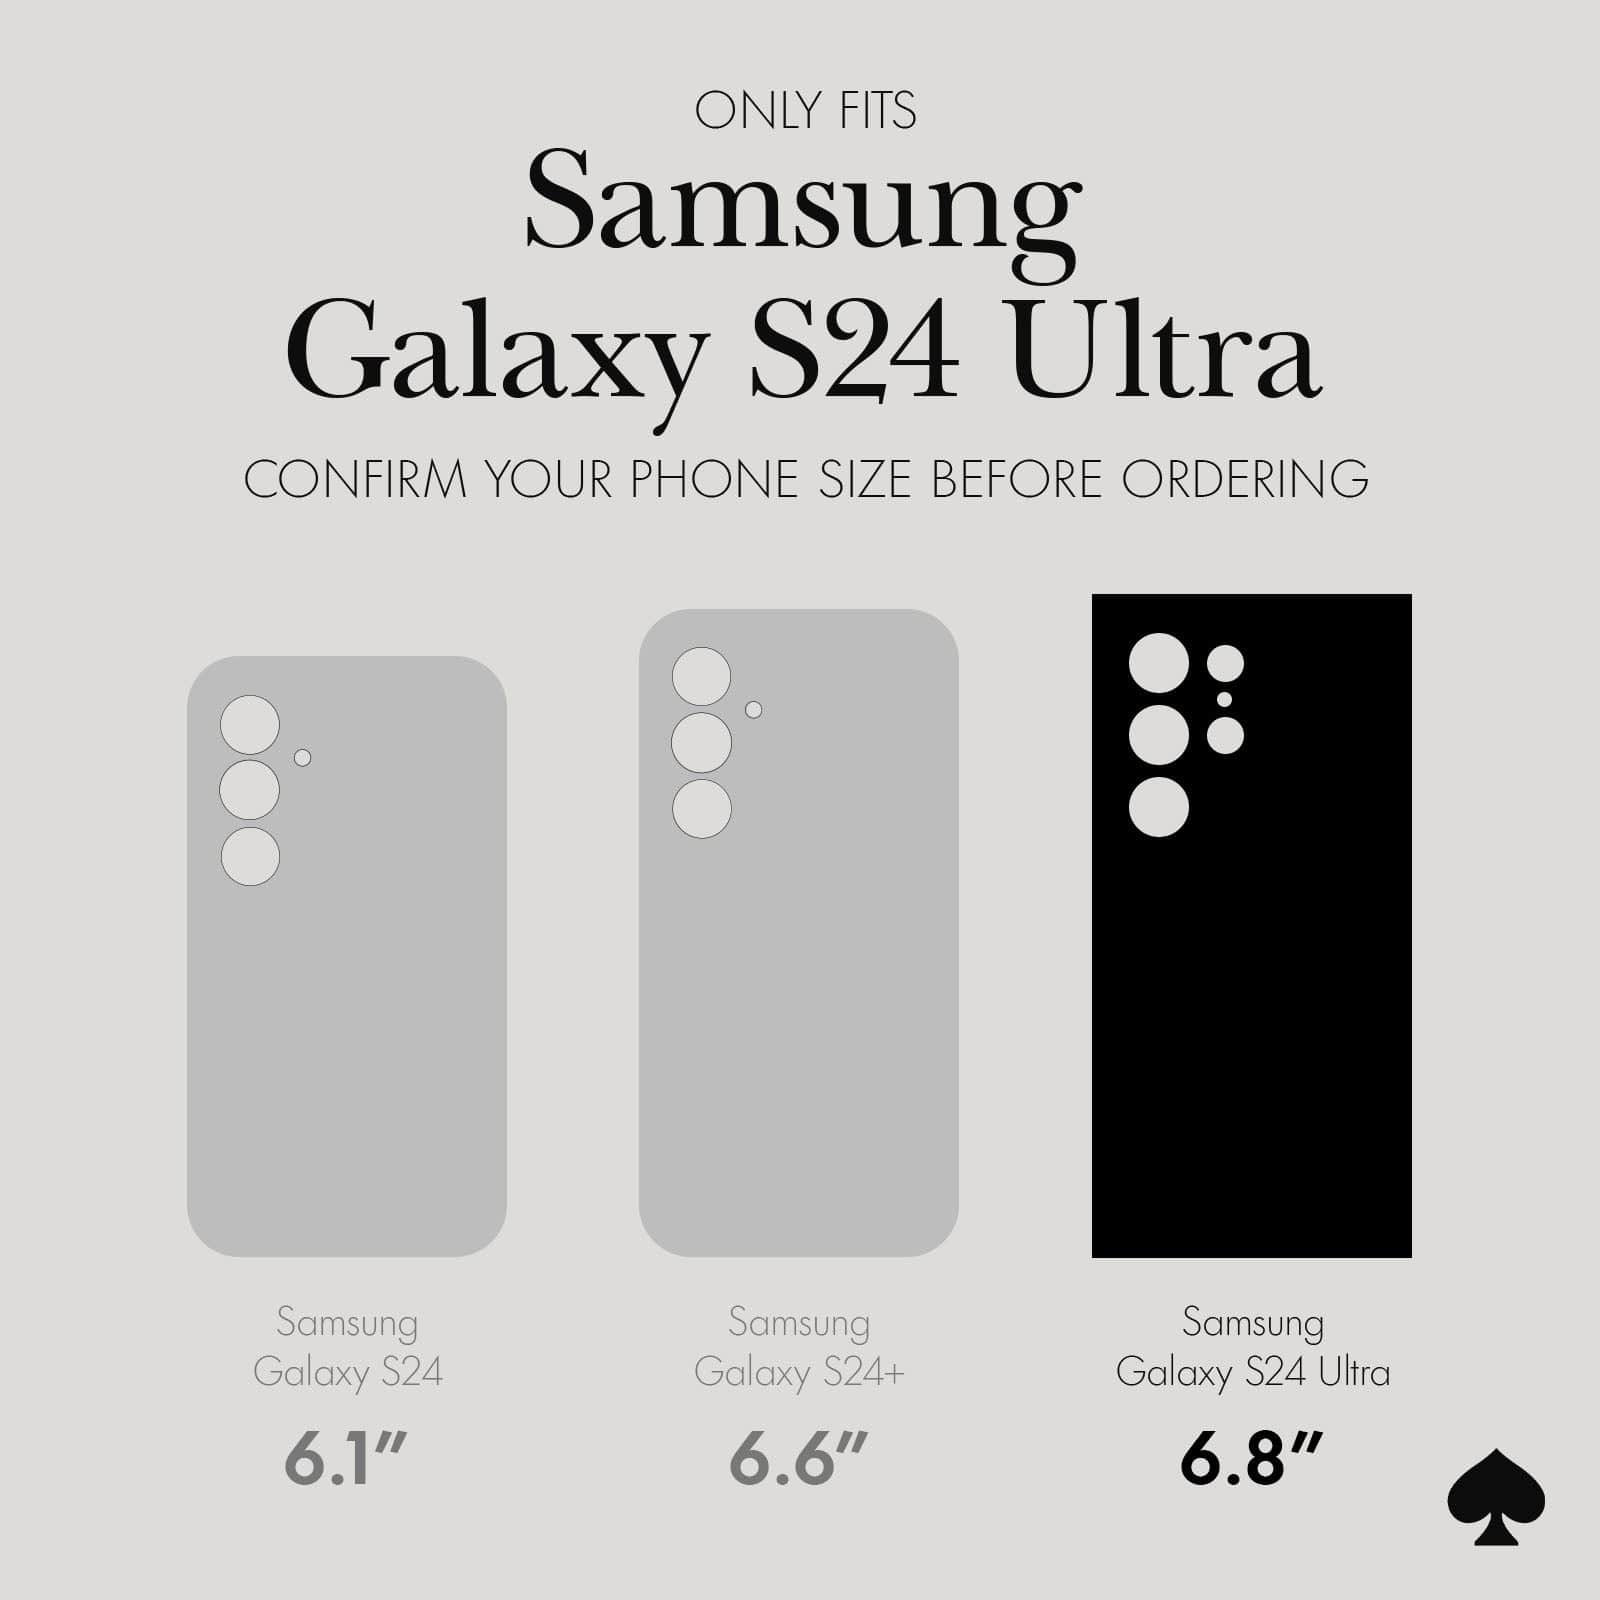 ONLY FITS SAMSUNG GALAXY S24 ULTRA CONFIRM YOUR PHONE SIZE BEFORE ORDERING